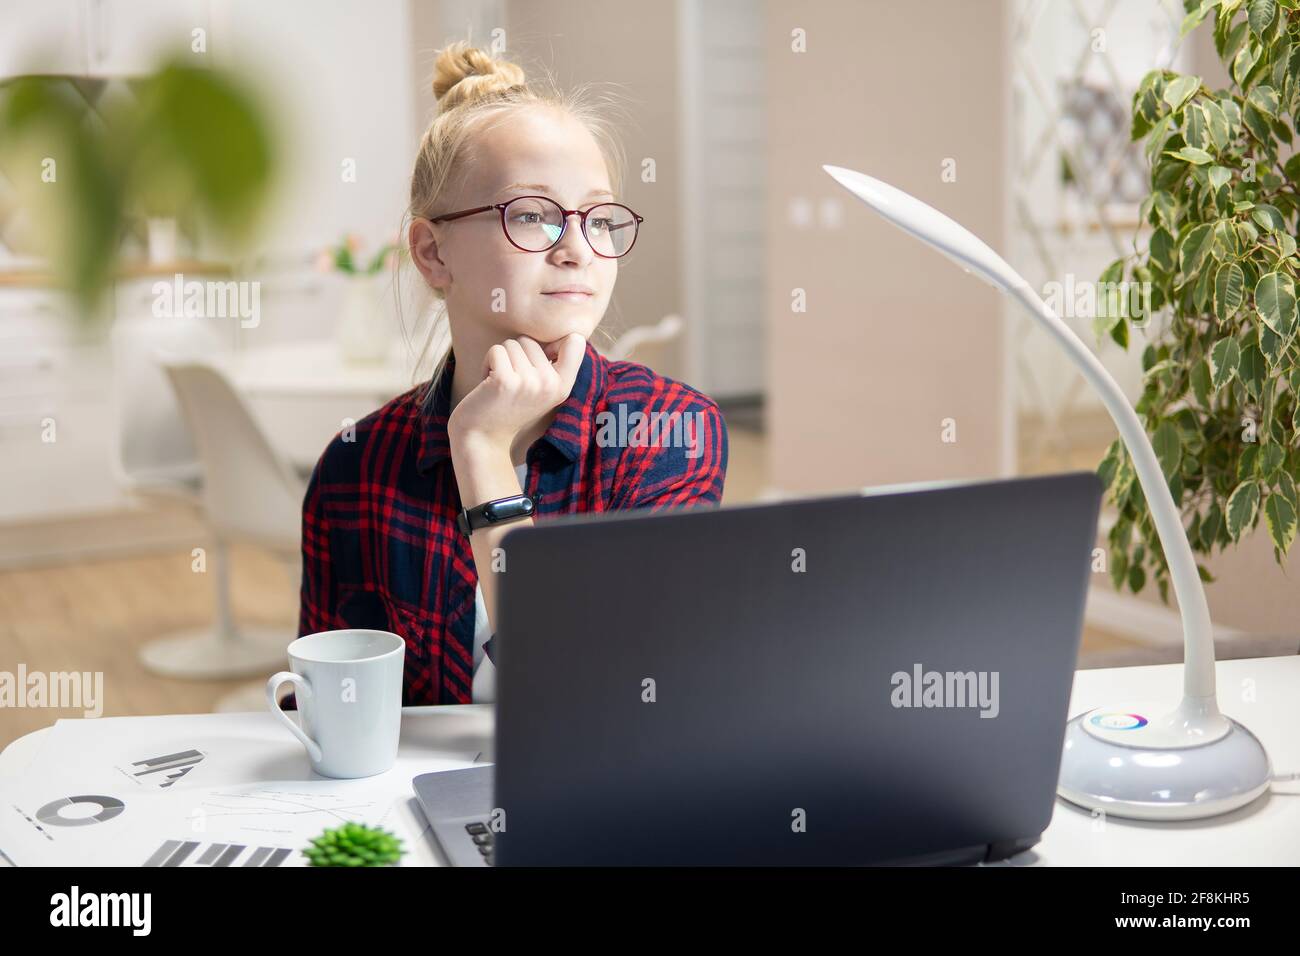 Blonde girl with glasses work on a laptop. Home-school concept Stock Photo